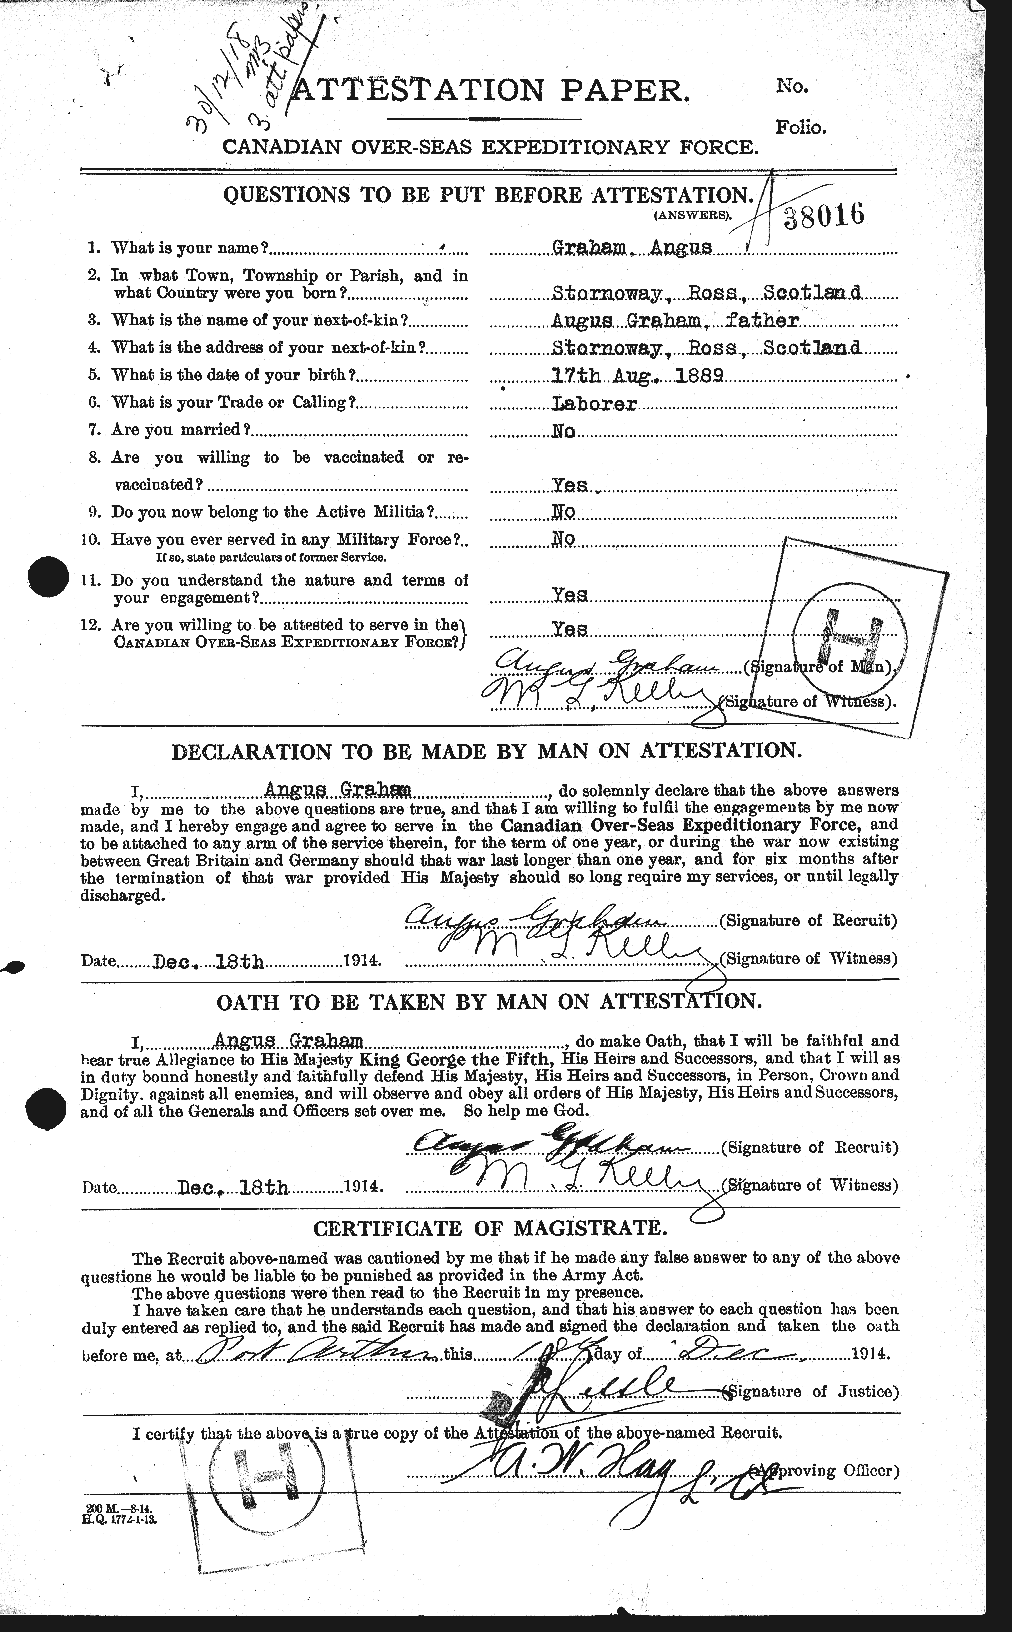 Personnel Records of the First World War - CEF 359621a